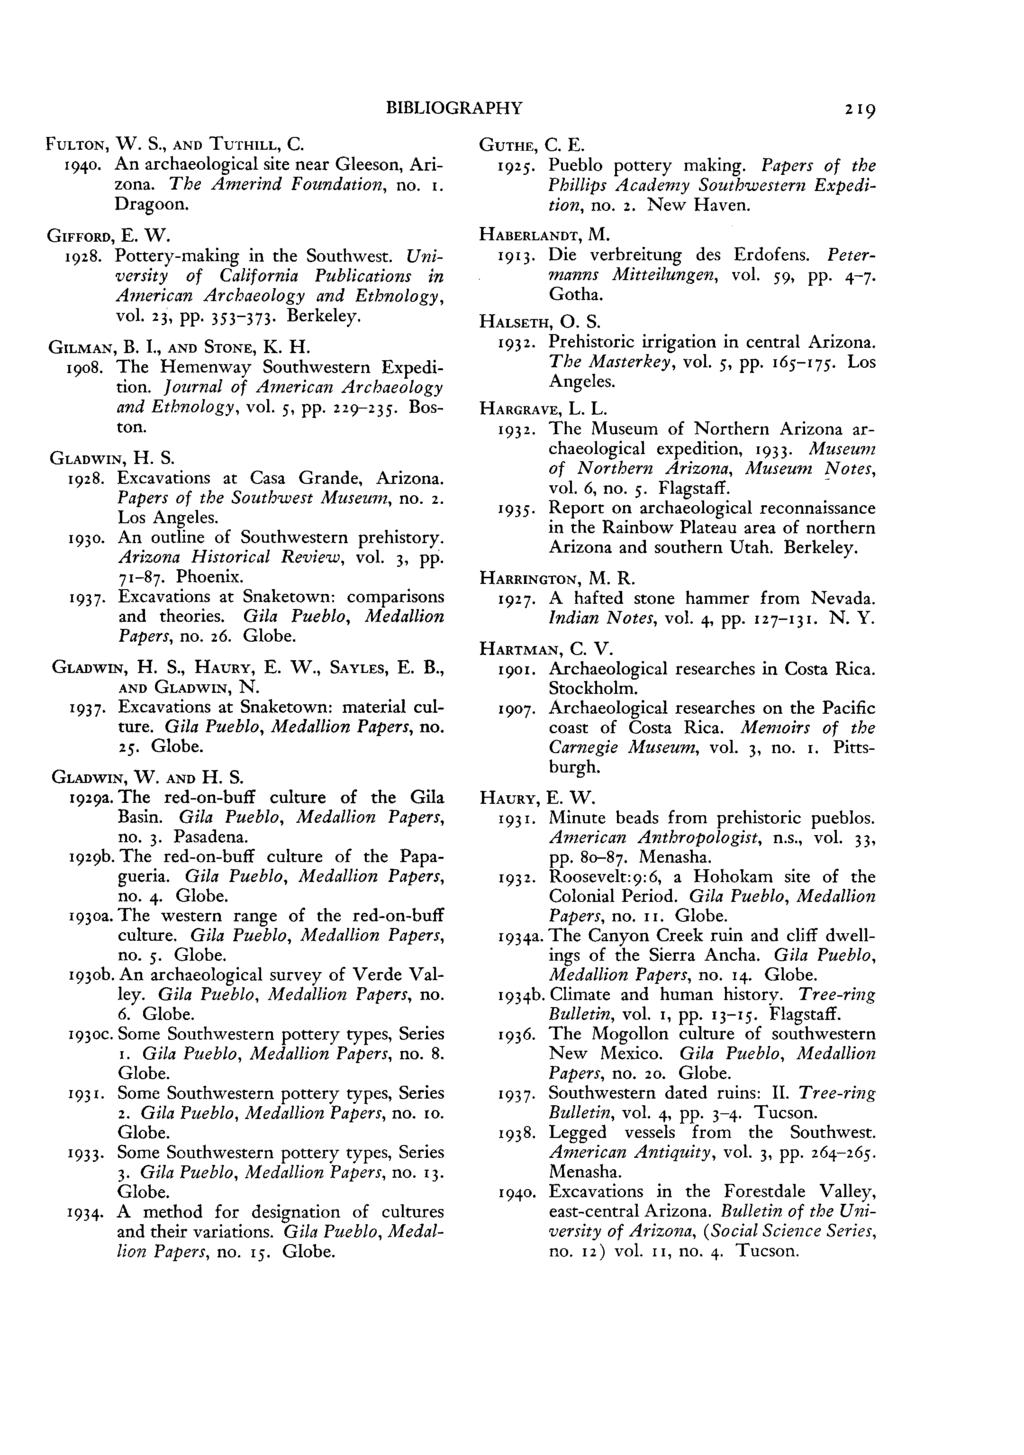 BIBLIOGRAPHY 219 FULTON, W. S., AND Tu -1-HILL, C. 1940. An archaeological site near Gleeson, Arizona. The Amerind Foundation, no. i. Dragoon. GIFFORD, E. W. 1928. Pottery-making in the Southwest.